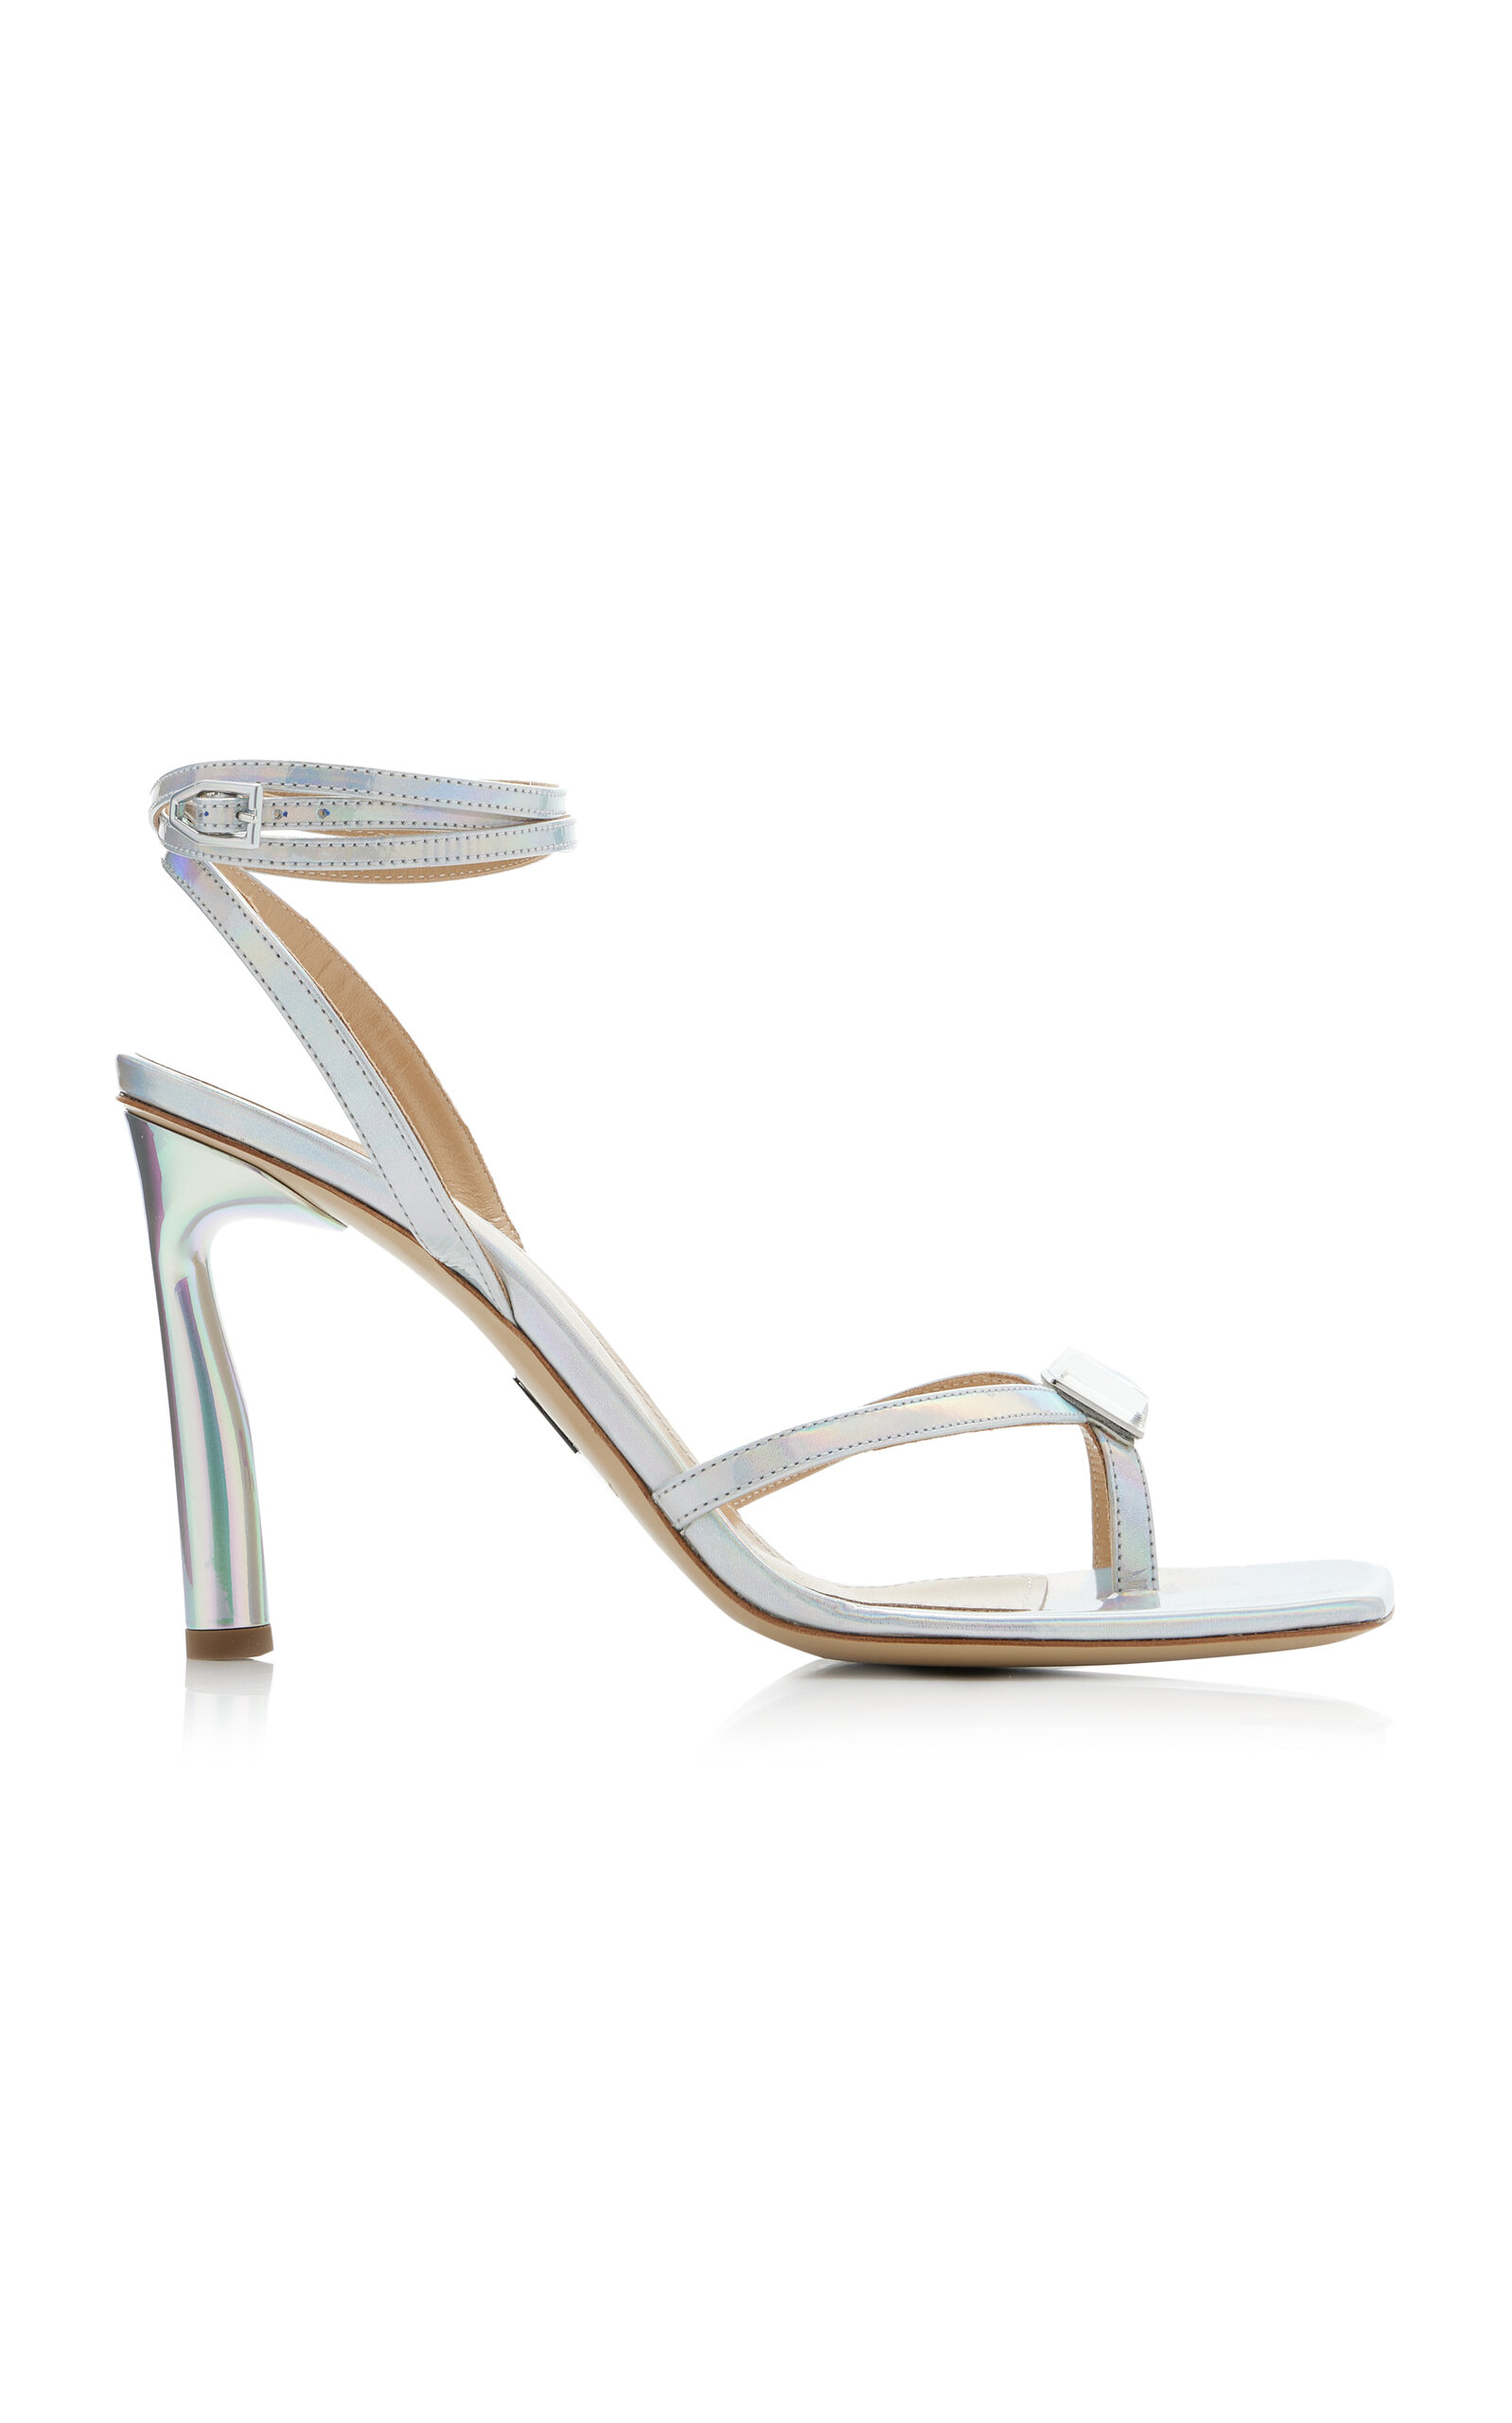 Iridescent Mirrored Leather Sandals